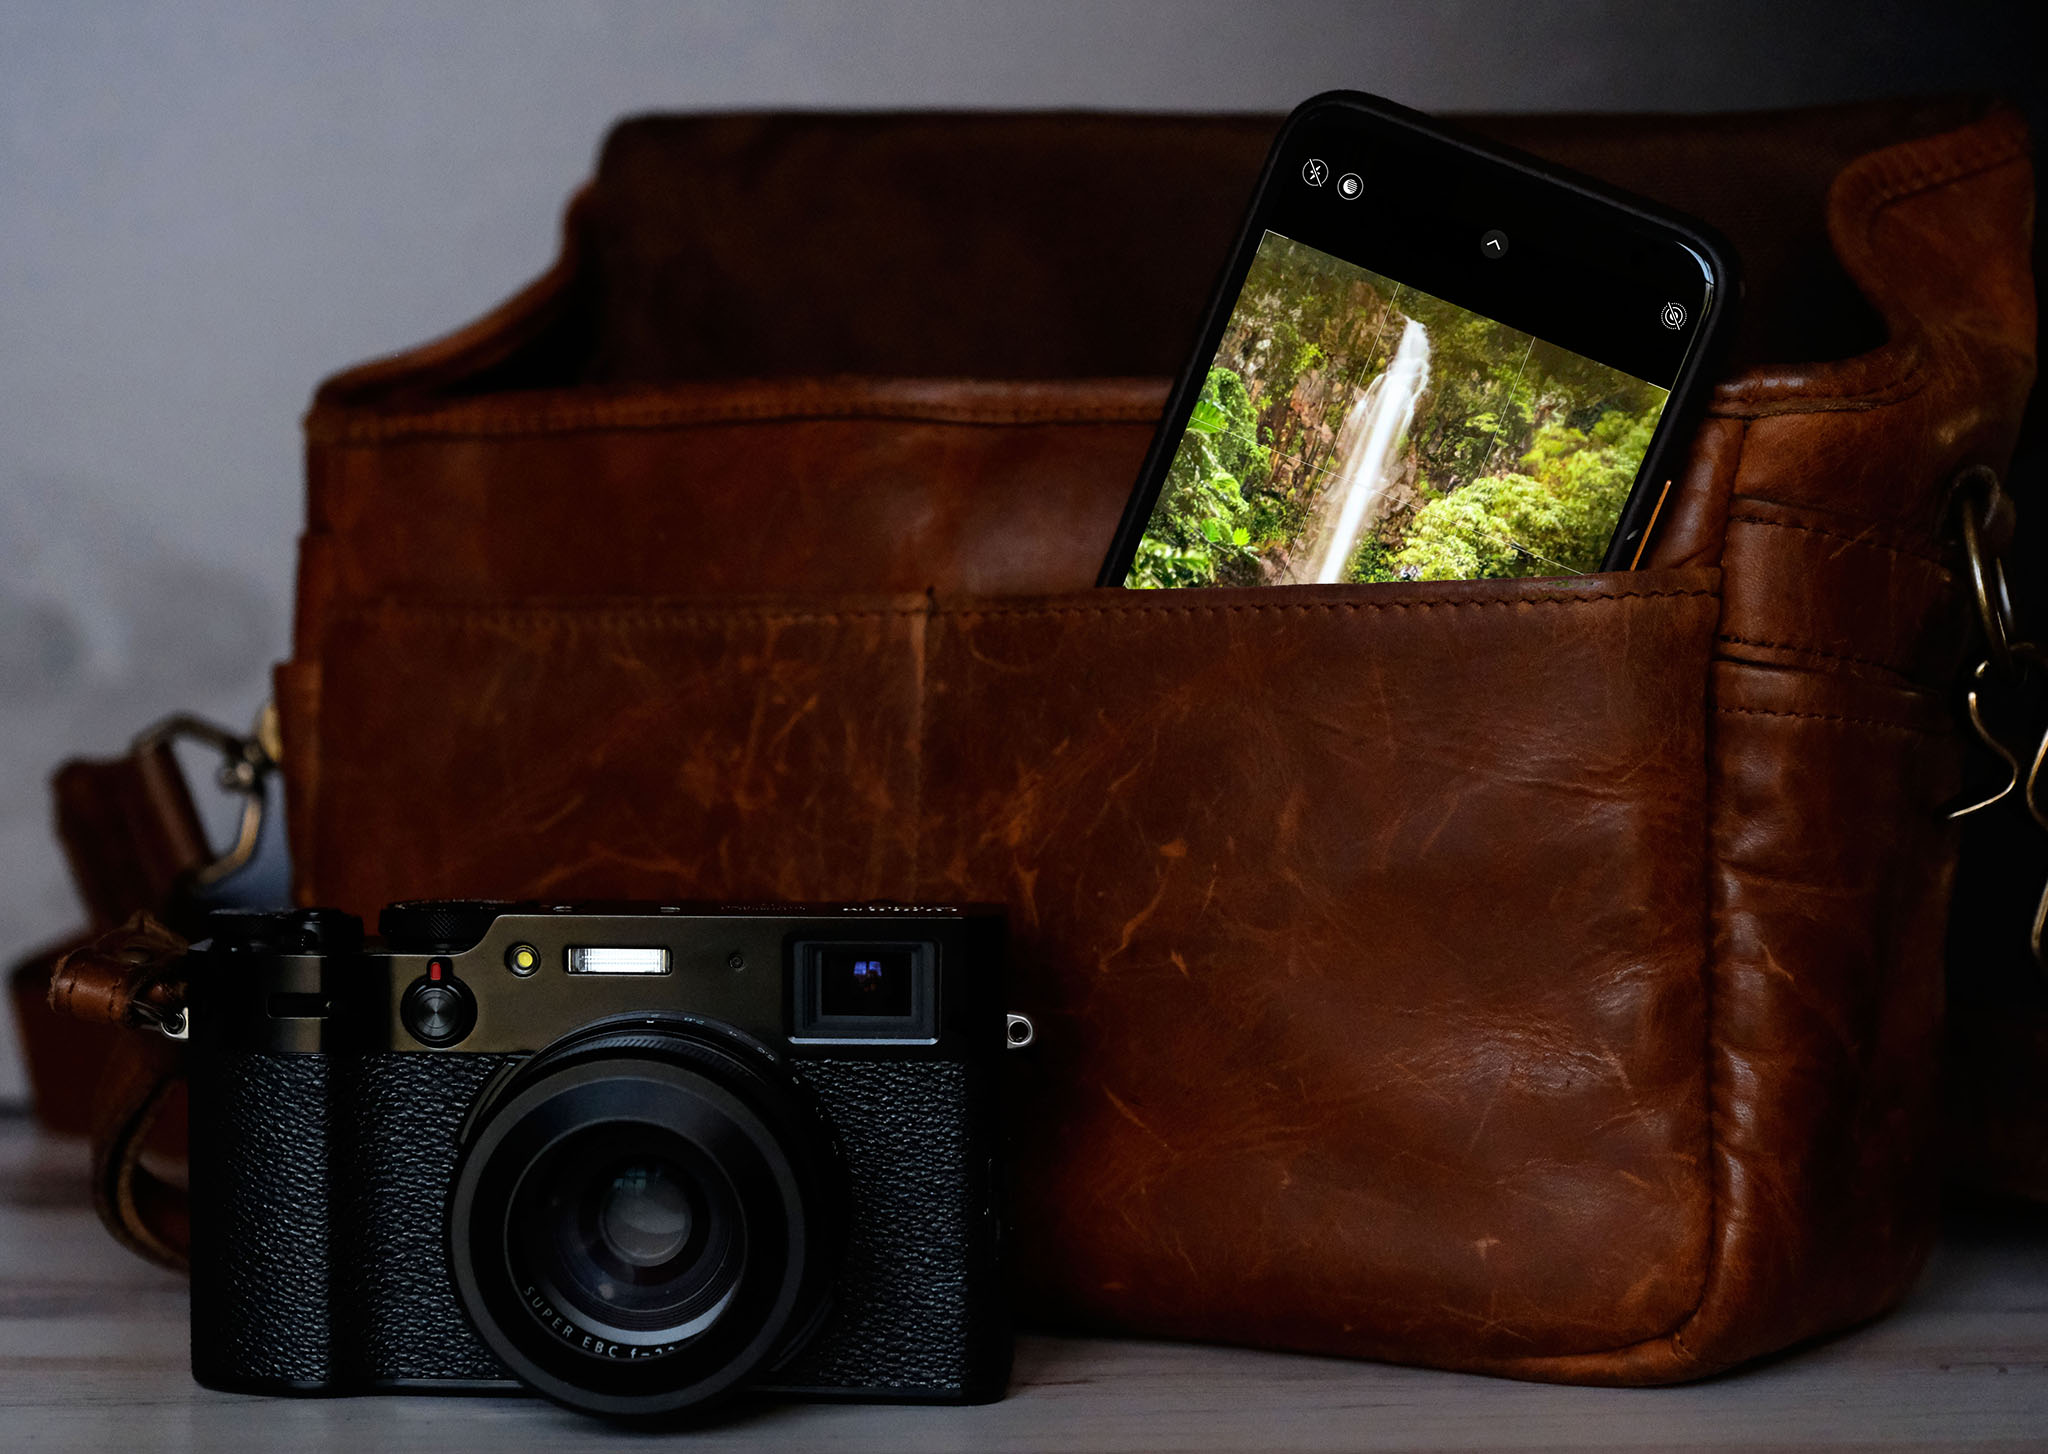 A photo of a camera and a smartphone in a brown leather bag with a photo of a waterfall on the screen.